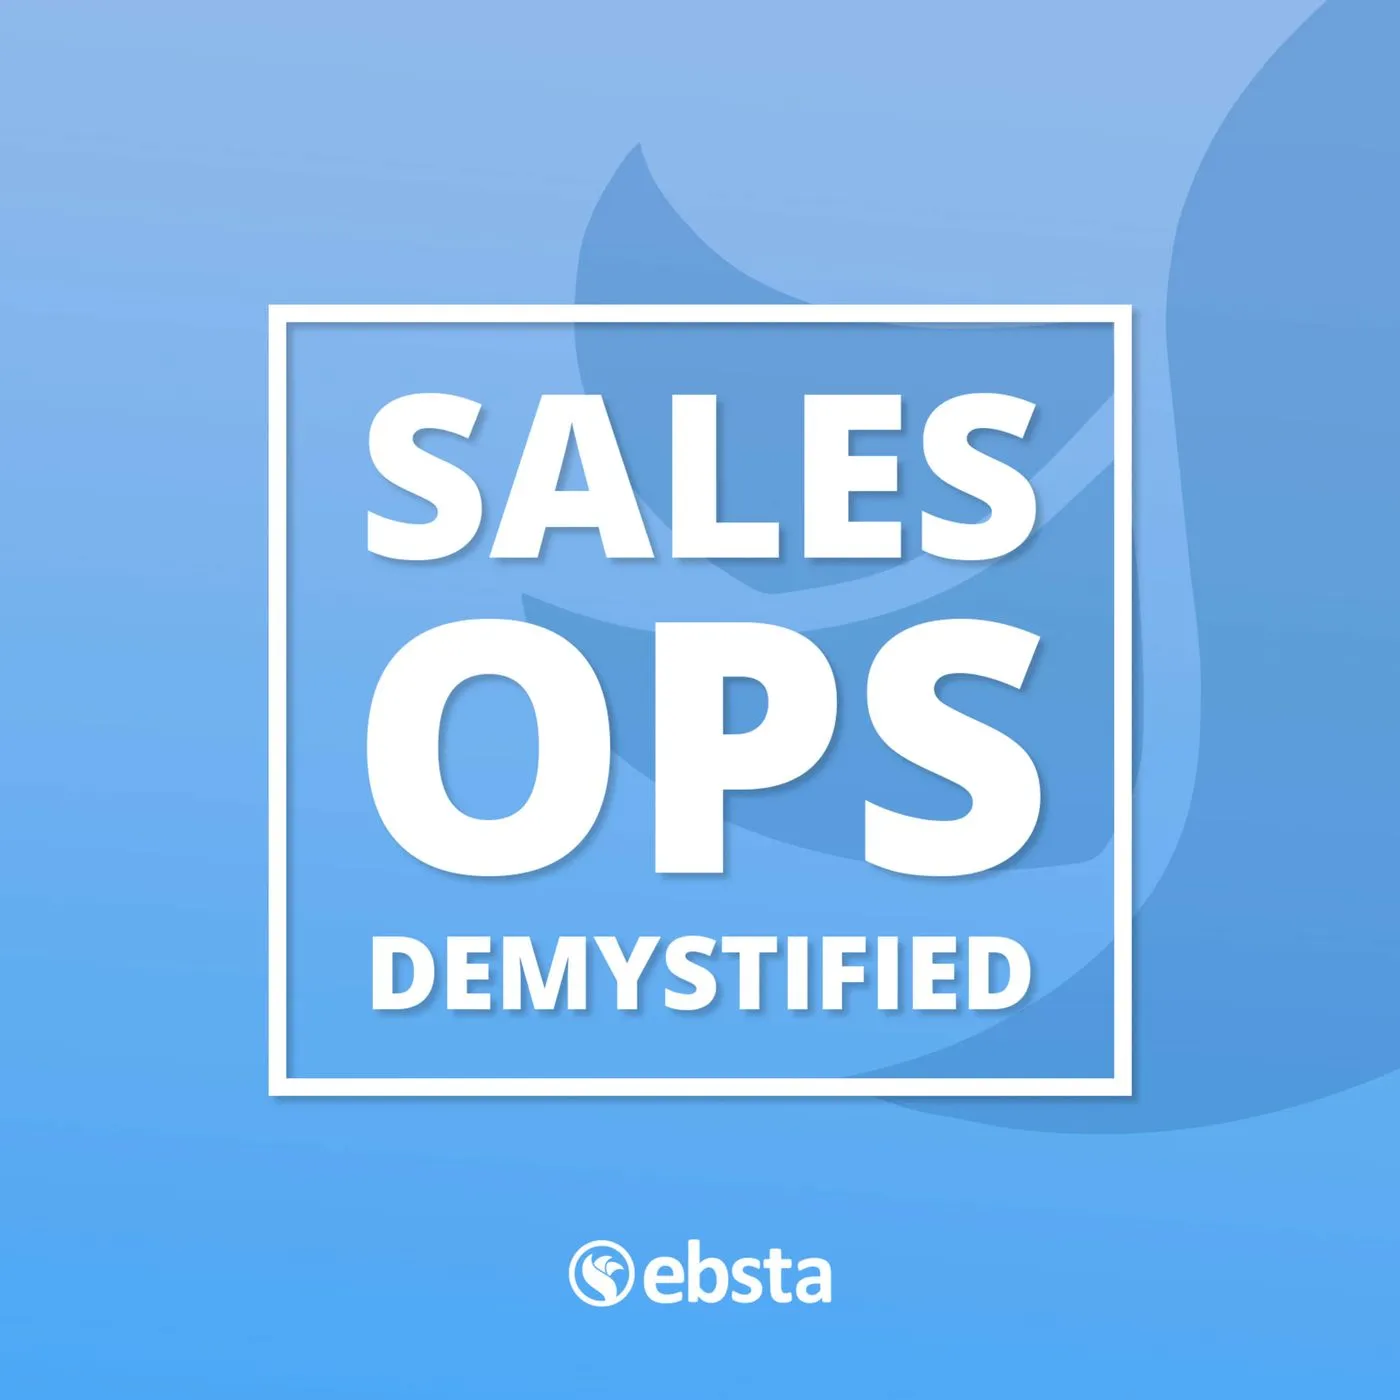 Sales Ops Demystified-sales podcasts for beginners